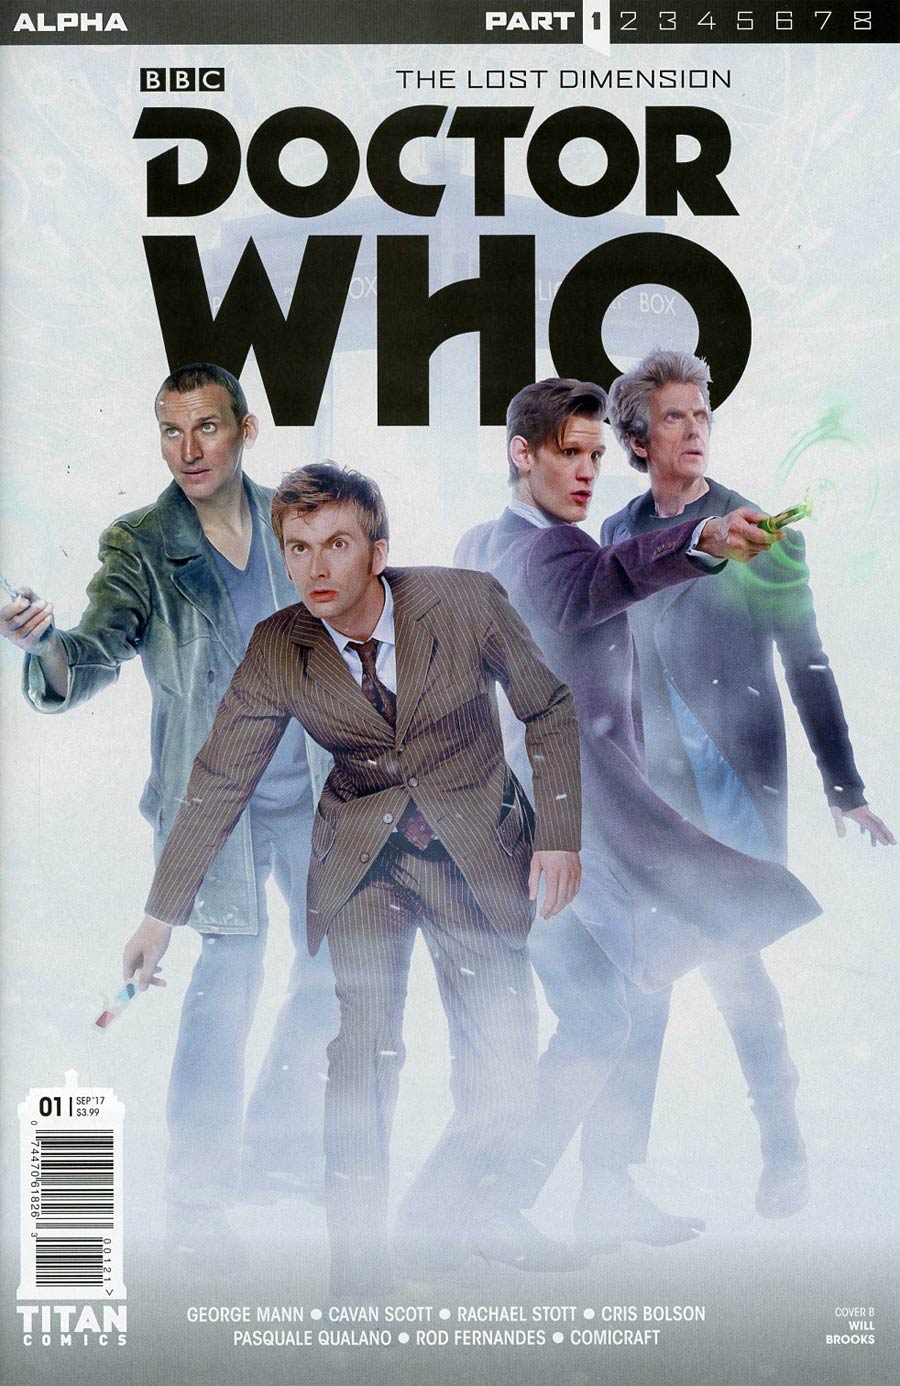 Doctor Who Lost Dimension Alpha #1 Cover B Variant Photo Cover (The Lost Dimension Part 1)